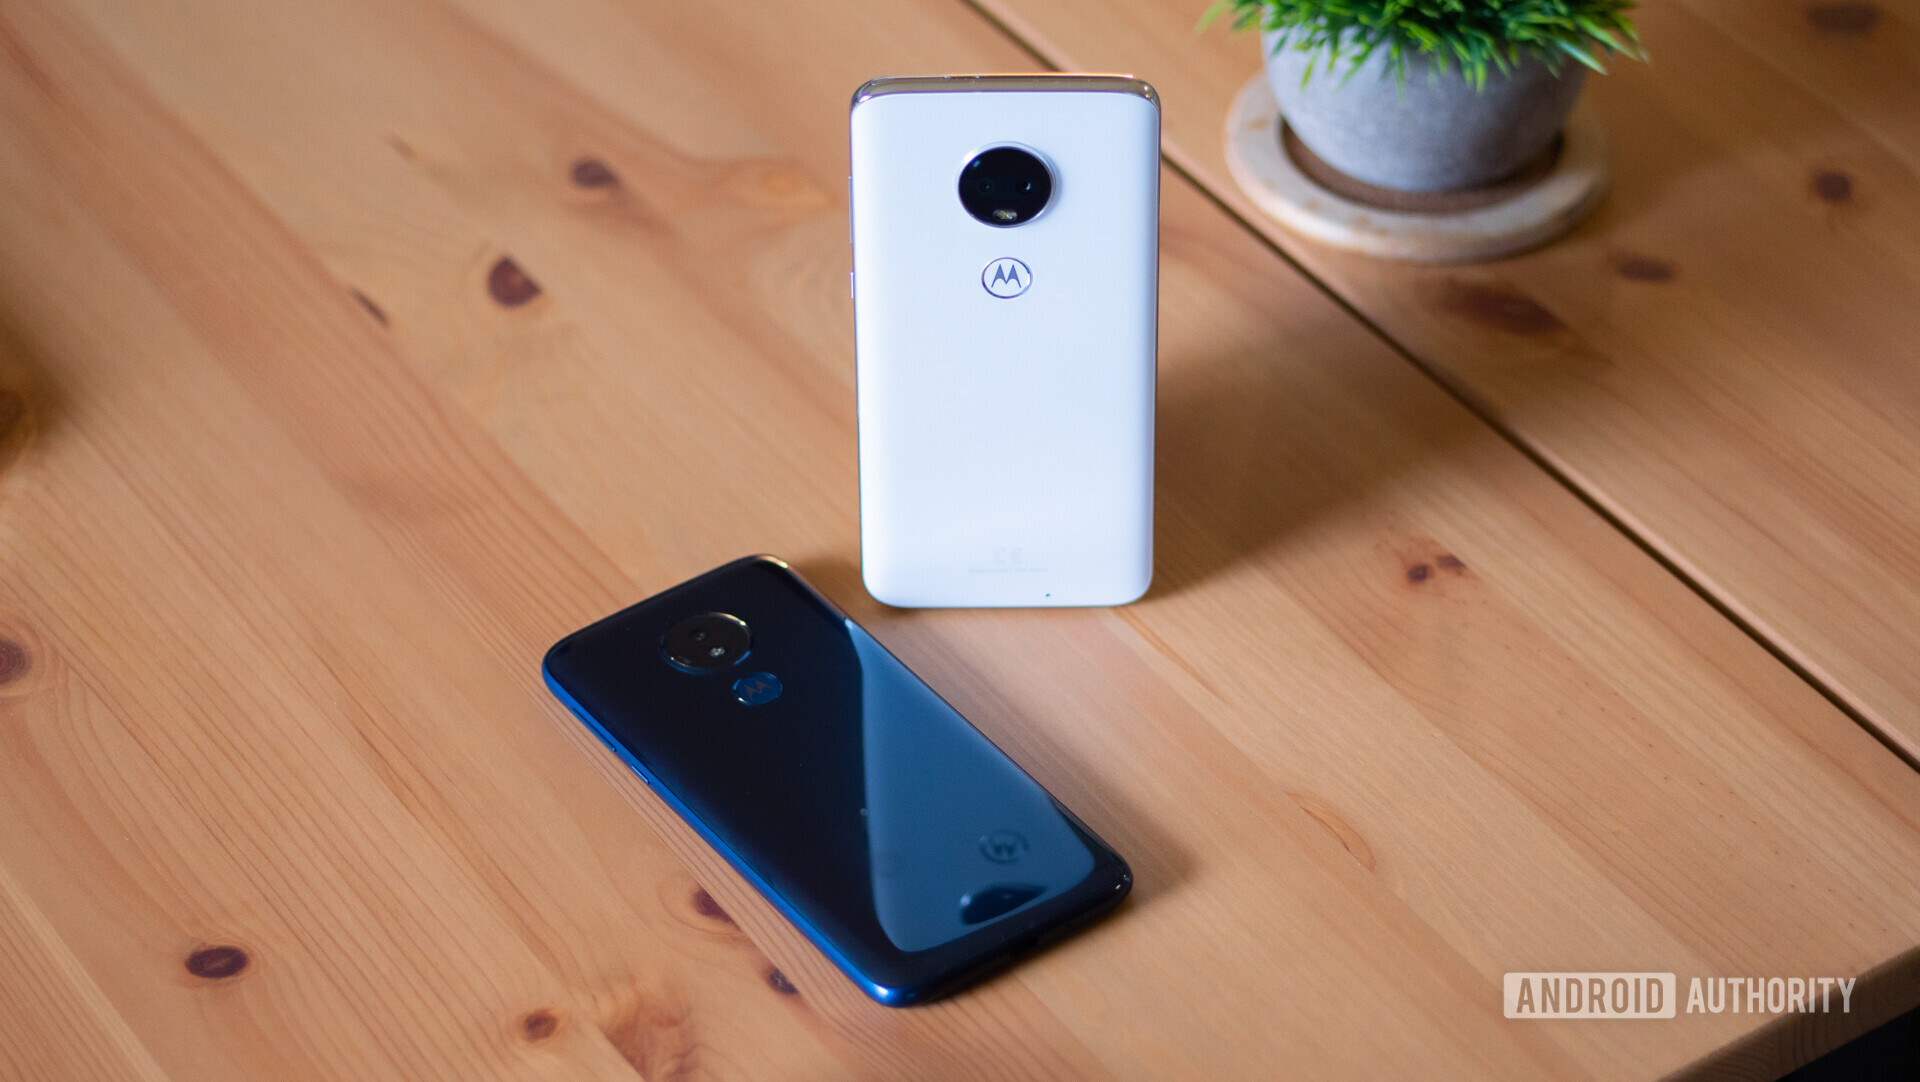 Moto G7 and G7 Power rear panels